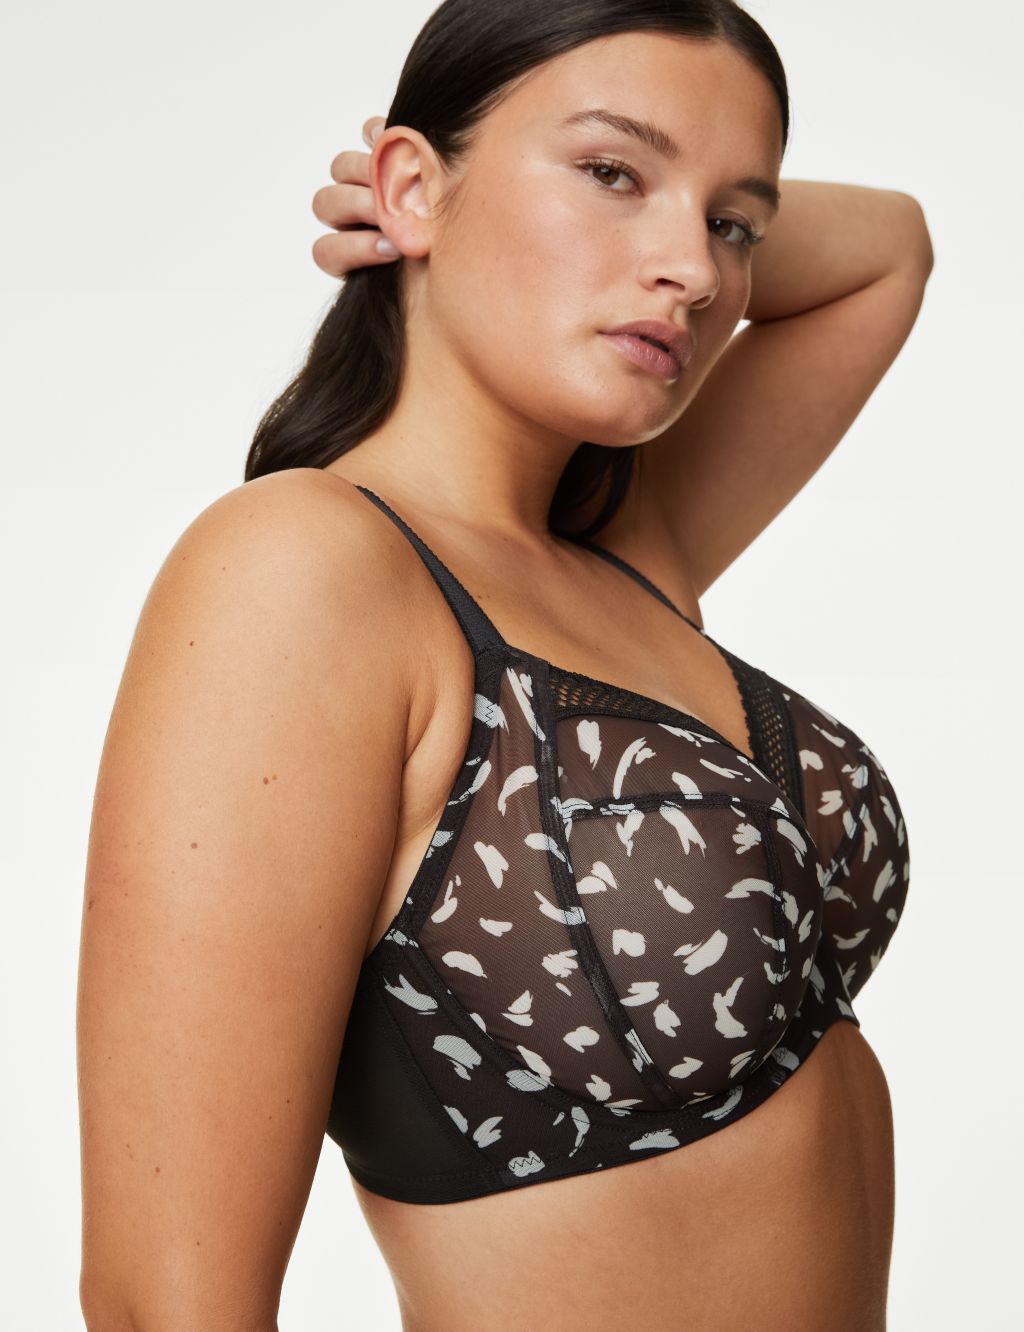 Printed Mesh Wired Extra Support Bra F-J image 2